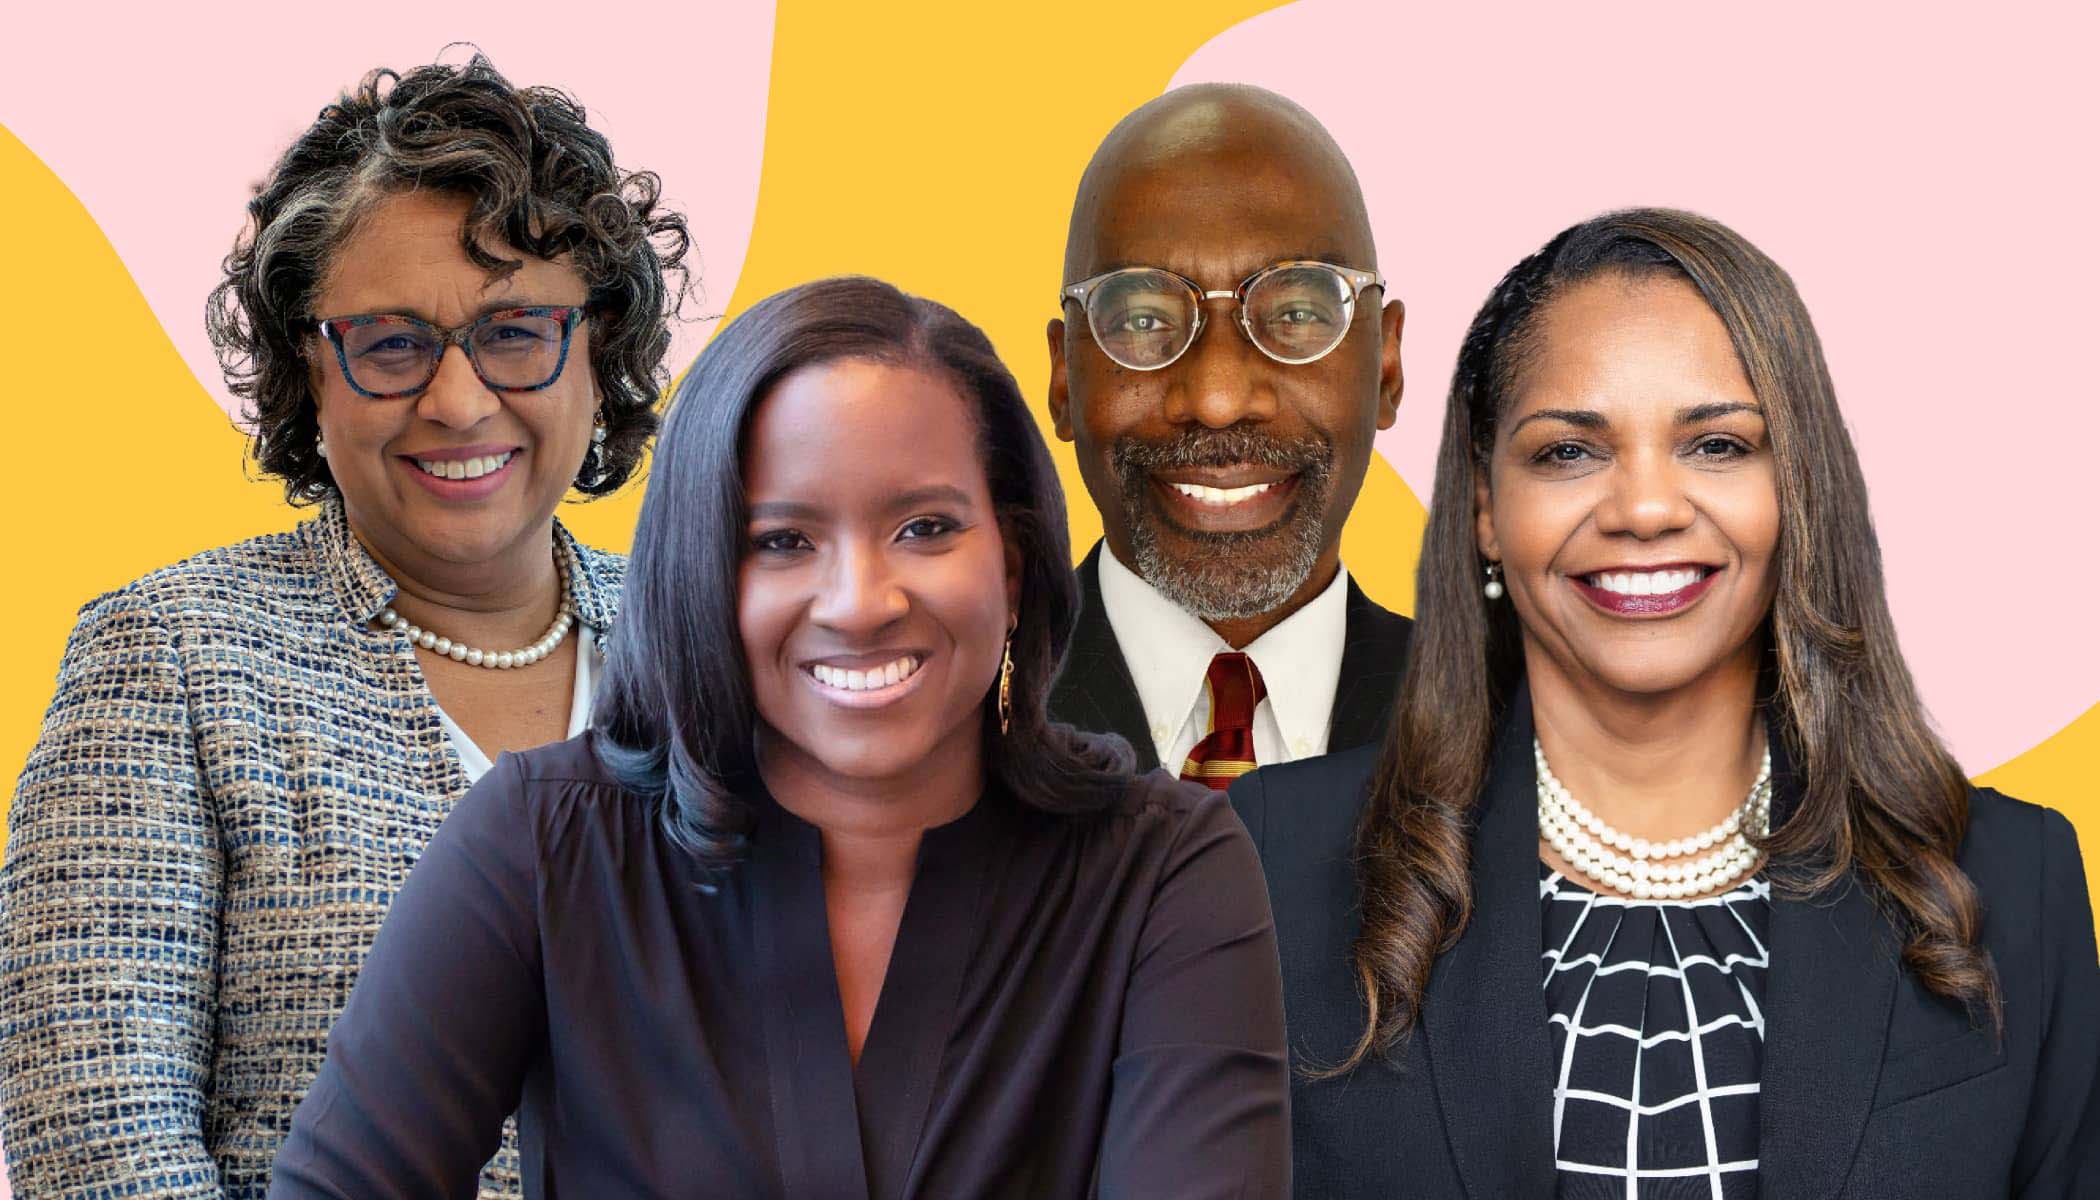 Headshots of four smiling HBCU leaders on a yellow and pink background.